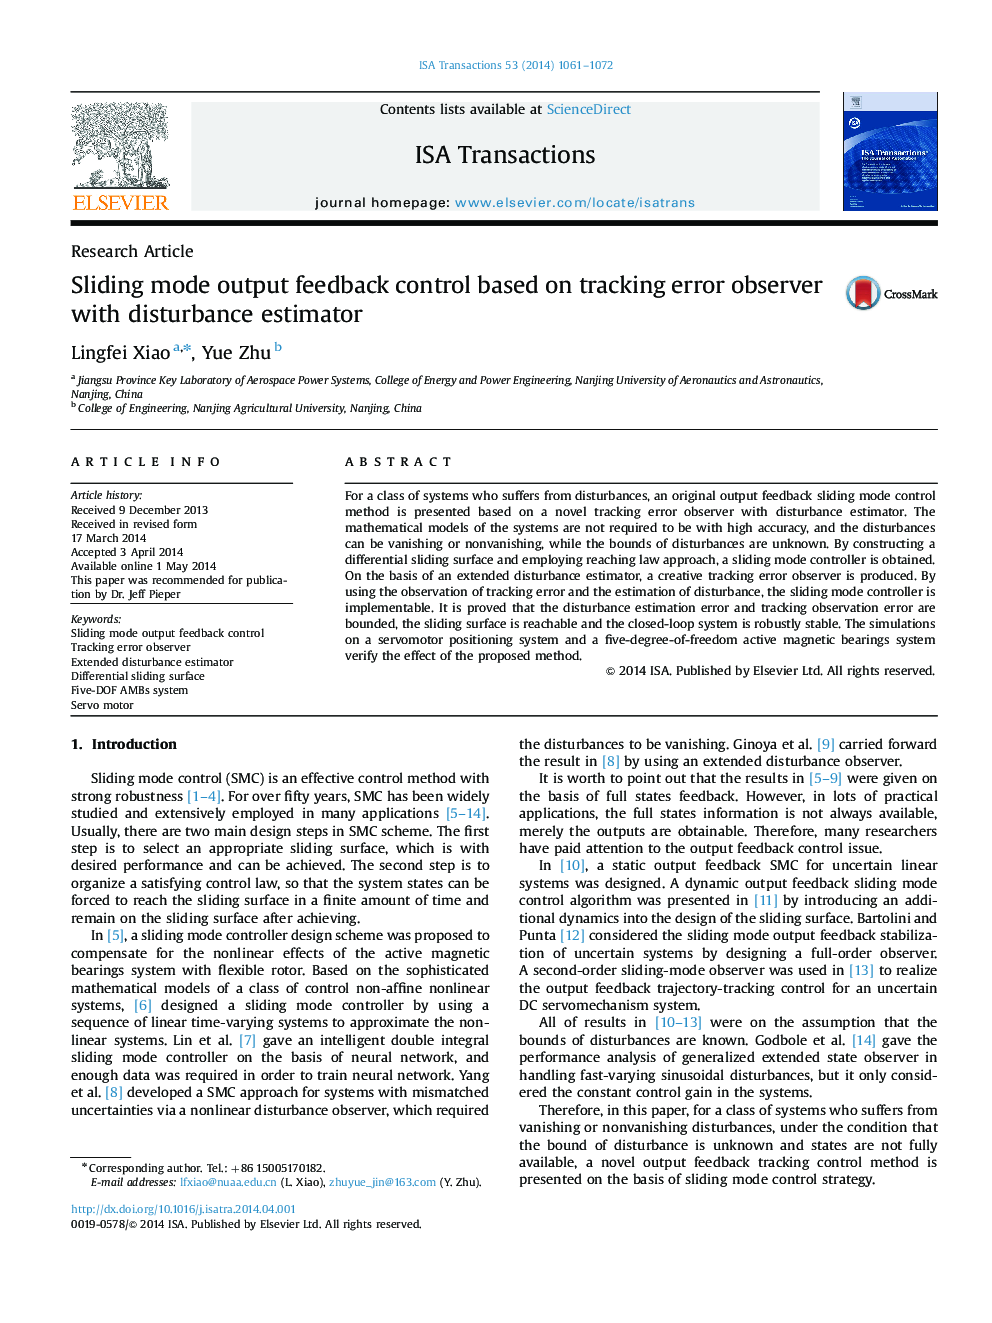 Research ArticleSliding mode output feedback control based on tracking error observer with disturbance estimator